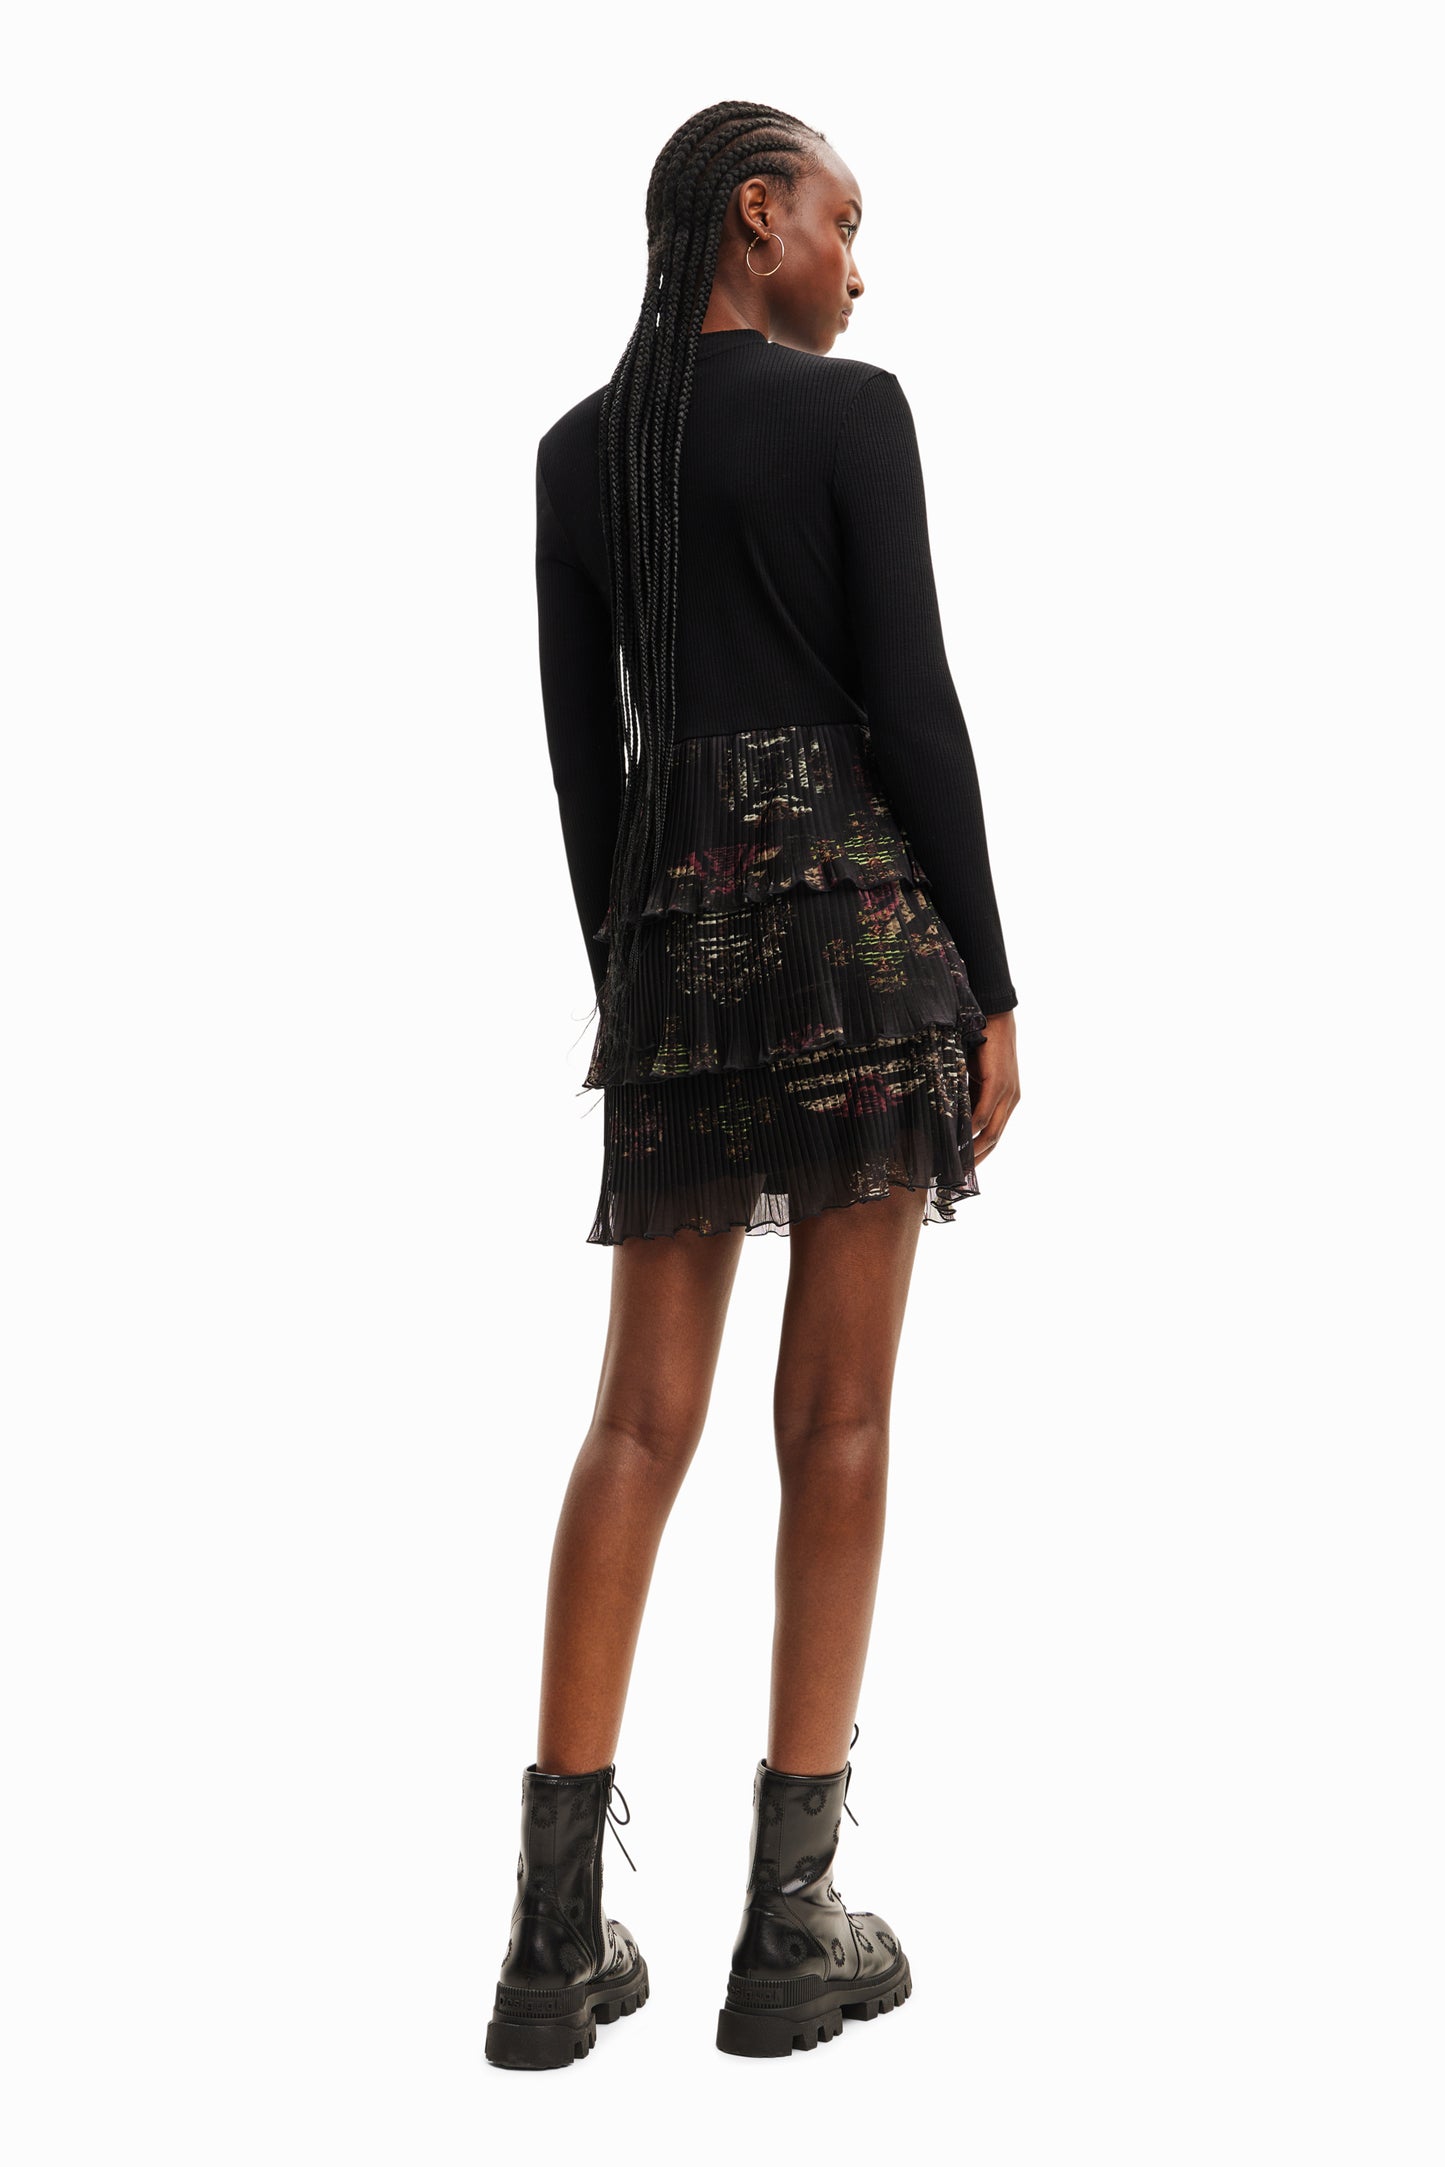 Desigual Short Pleated Dress - Above The Crowd Boutique